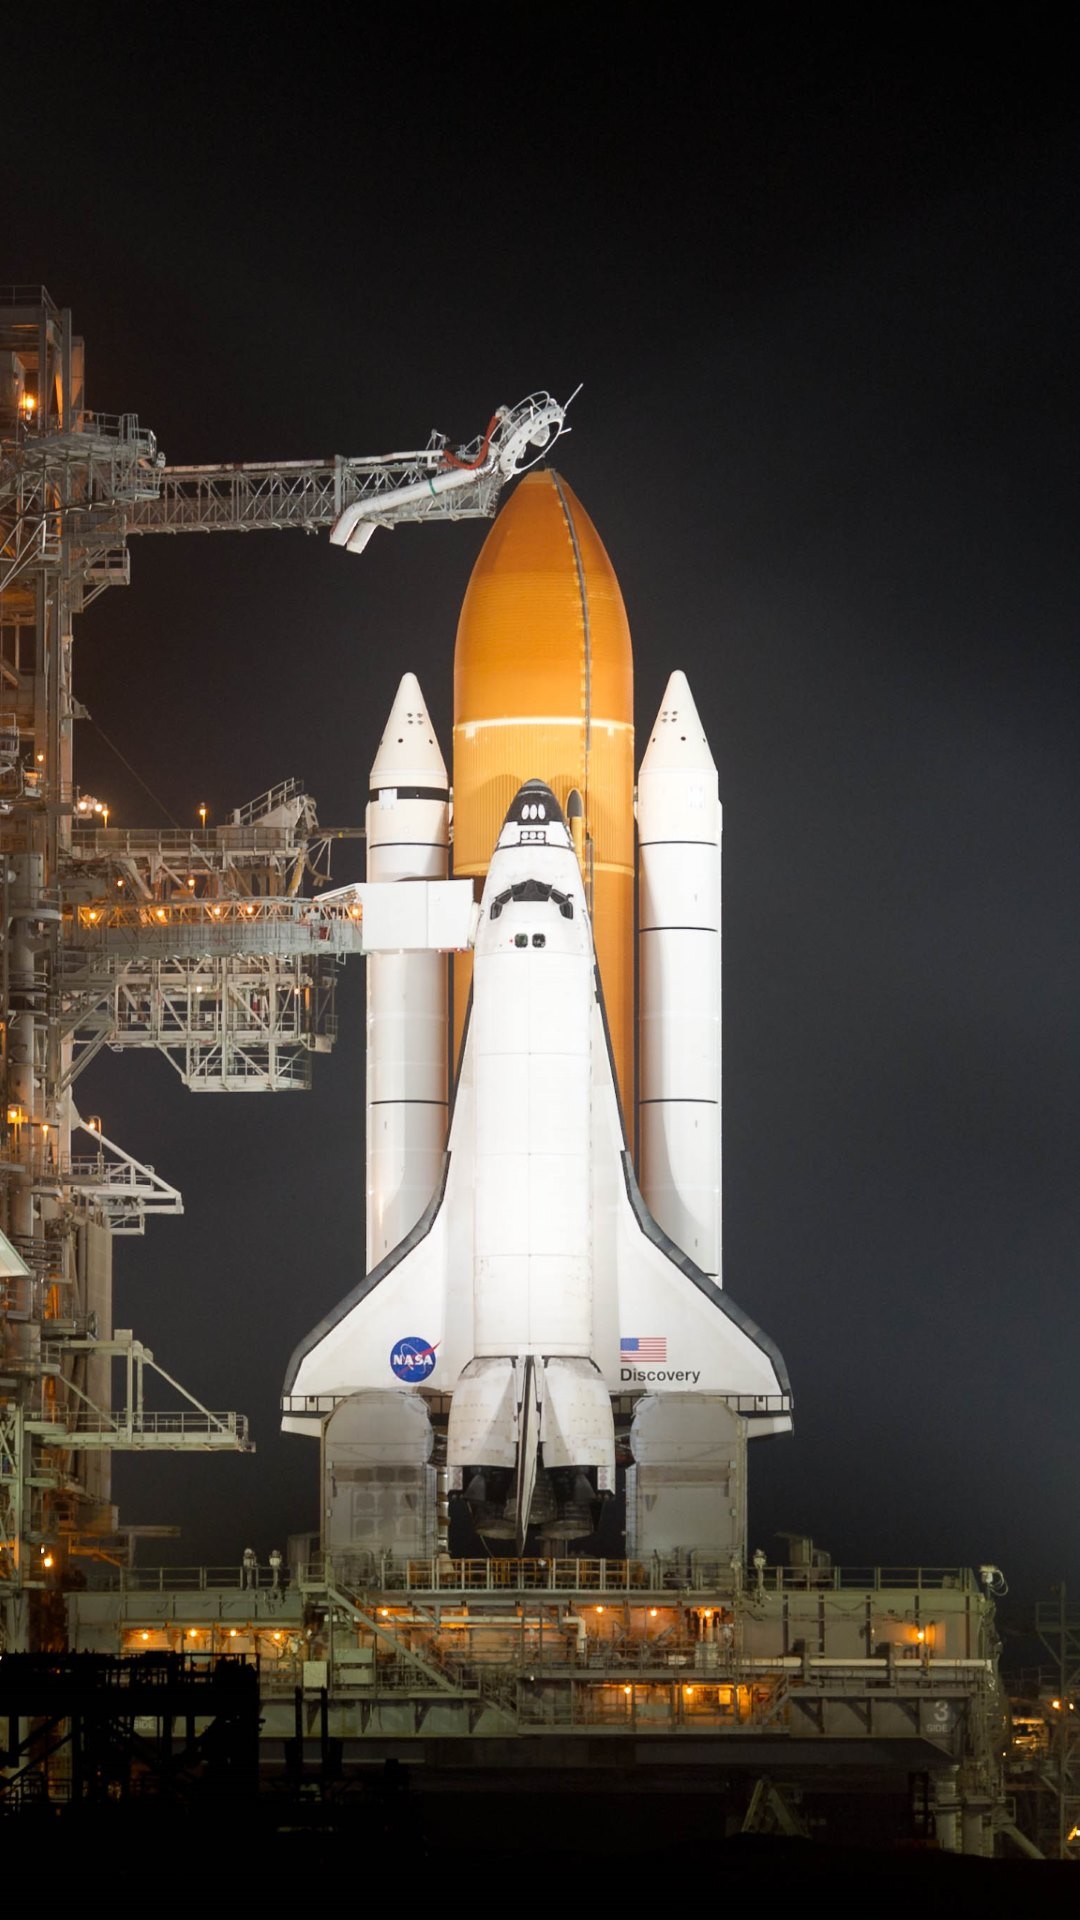 1080x1920 And in the 4th wallpaper is the NASA Discovery Shuttle on the launch  platform ready for download in 4K, HD and wide sizes